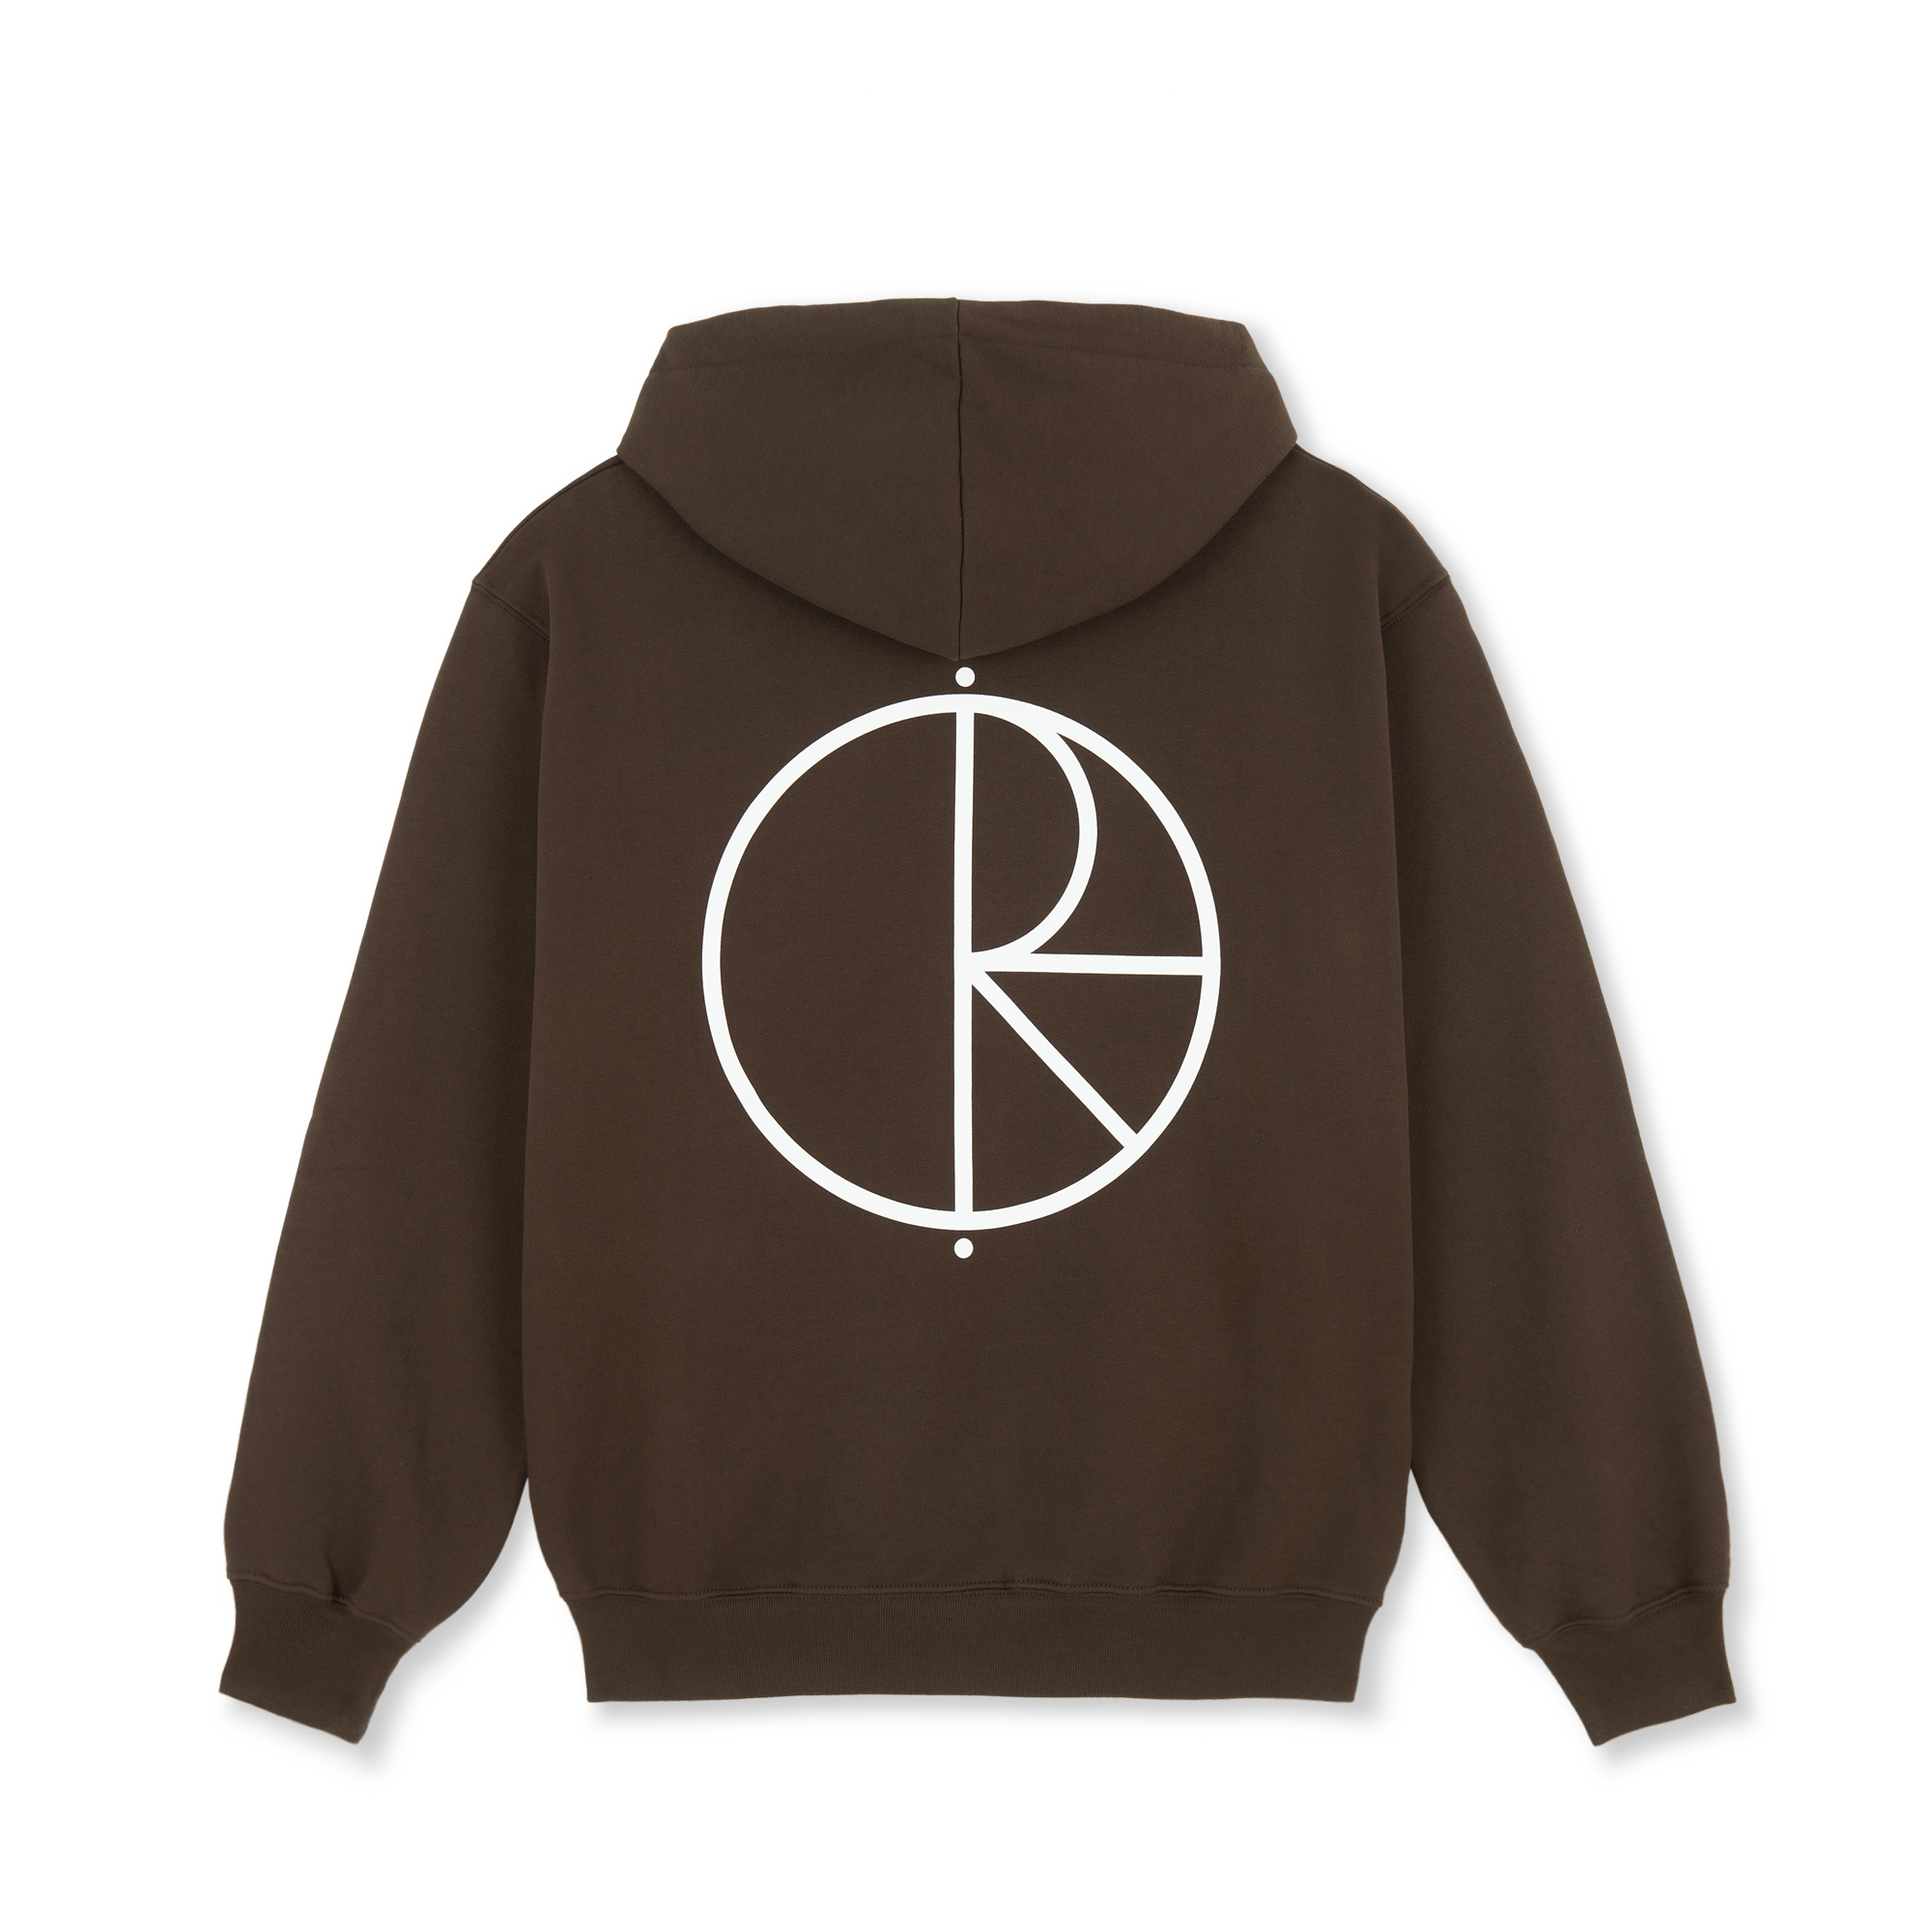 Brown polar hooded sweatshirt with white logos on front and back. Free uk shipping on orders over £50